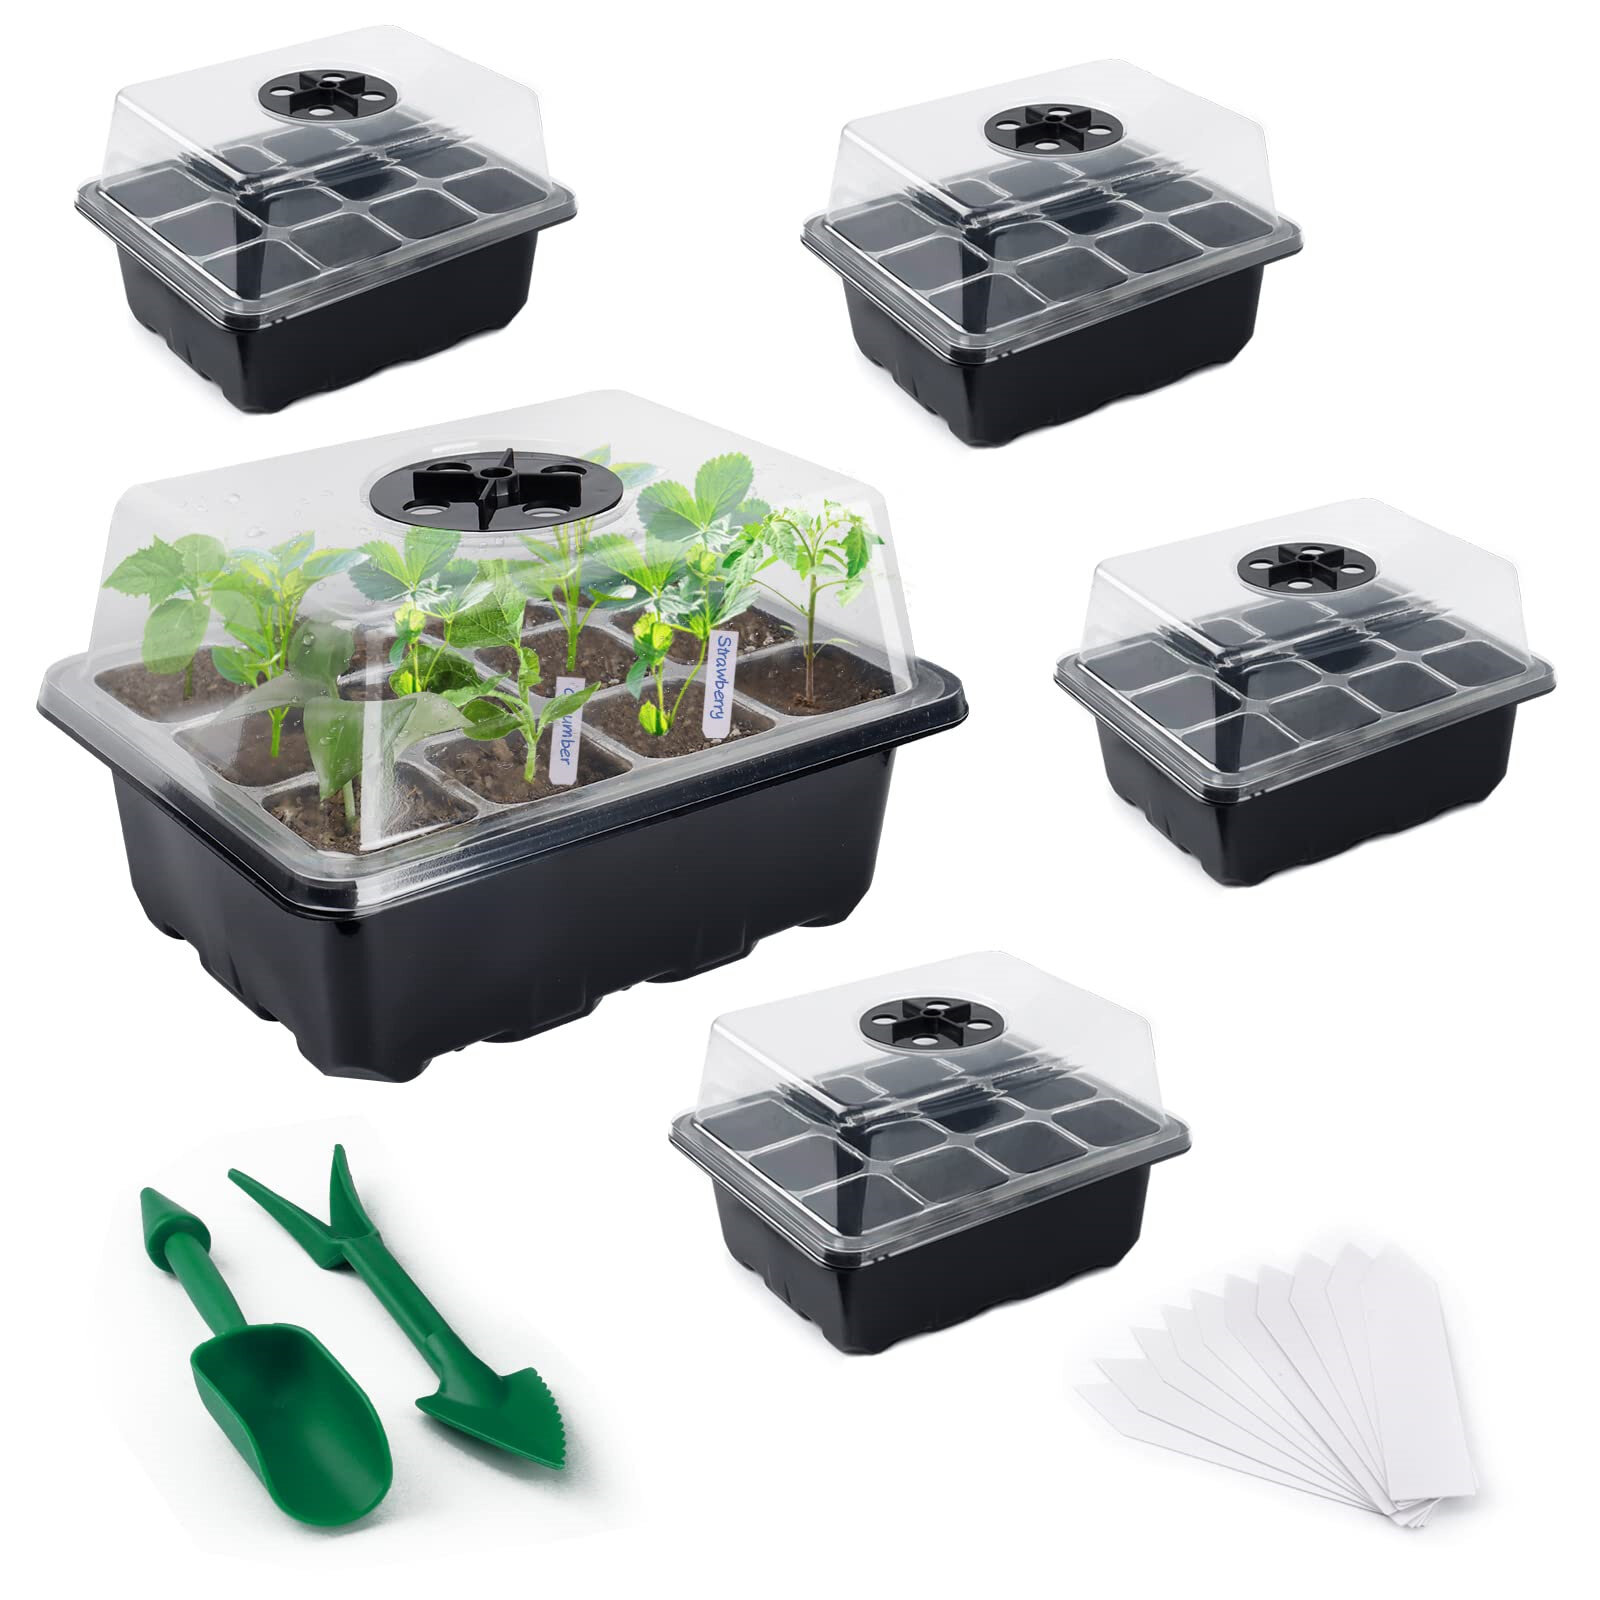 5 Pack Seedling Starter Trays 5 pcs Seed Starter Tray, Black 12 Cells Plant Germination Tray Seed Starter Kit Grow Plant Pots with Lid for Greenhouse Seeds Plant Growing